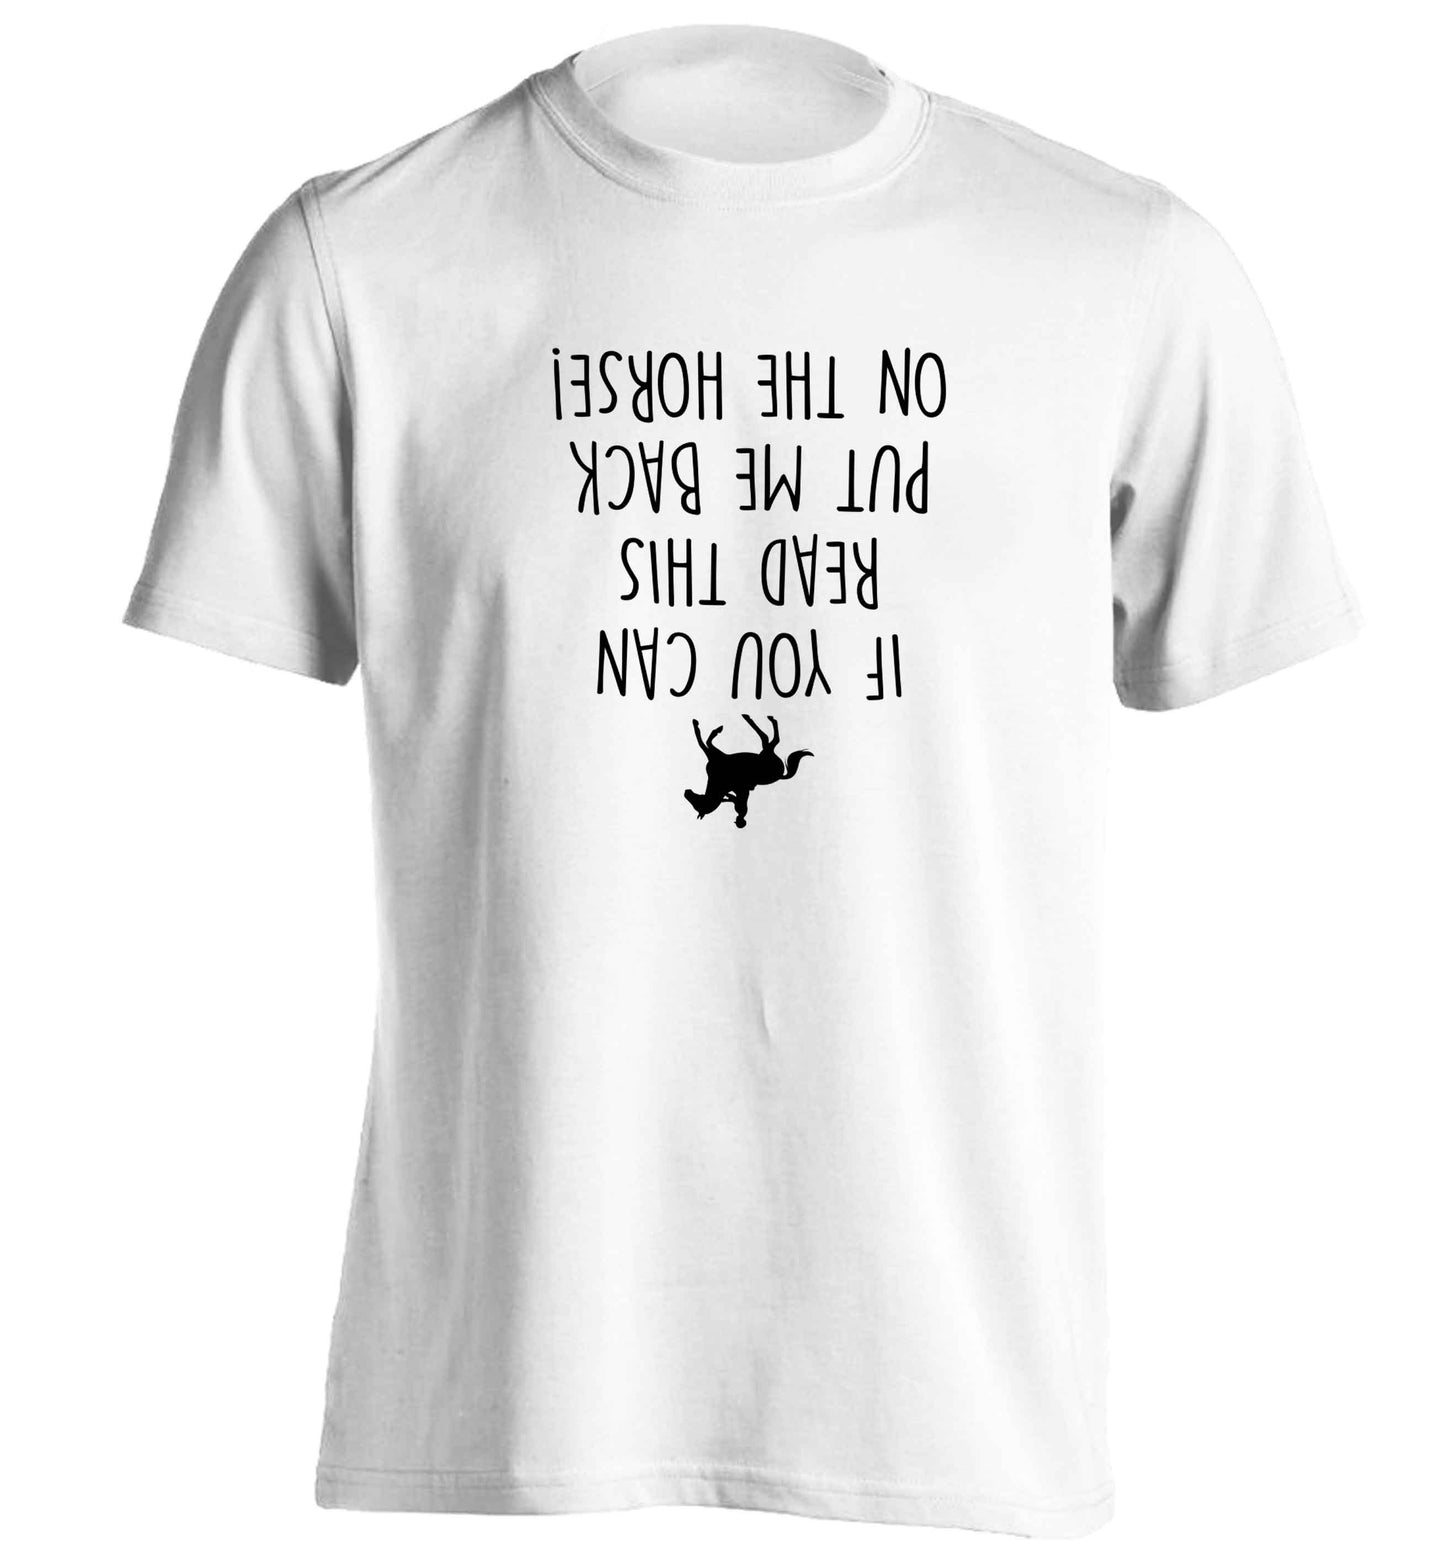 If you can read this put me back on the horse adults unisex white Tshirt 2XL